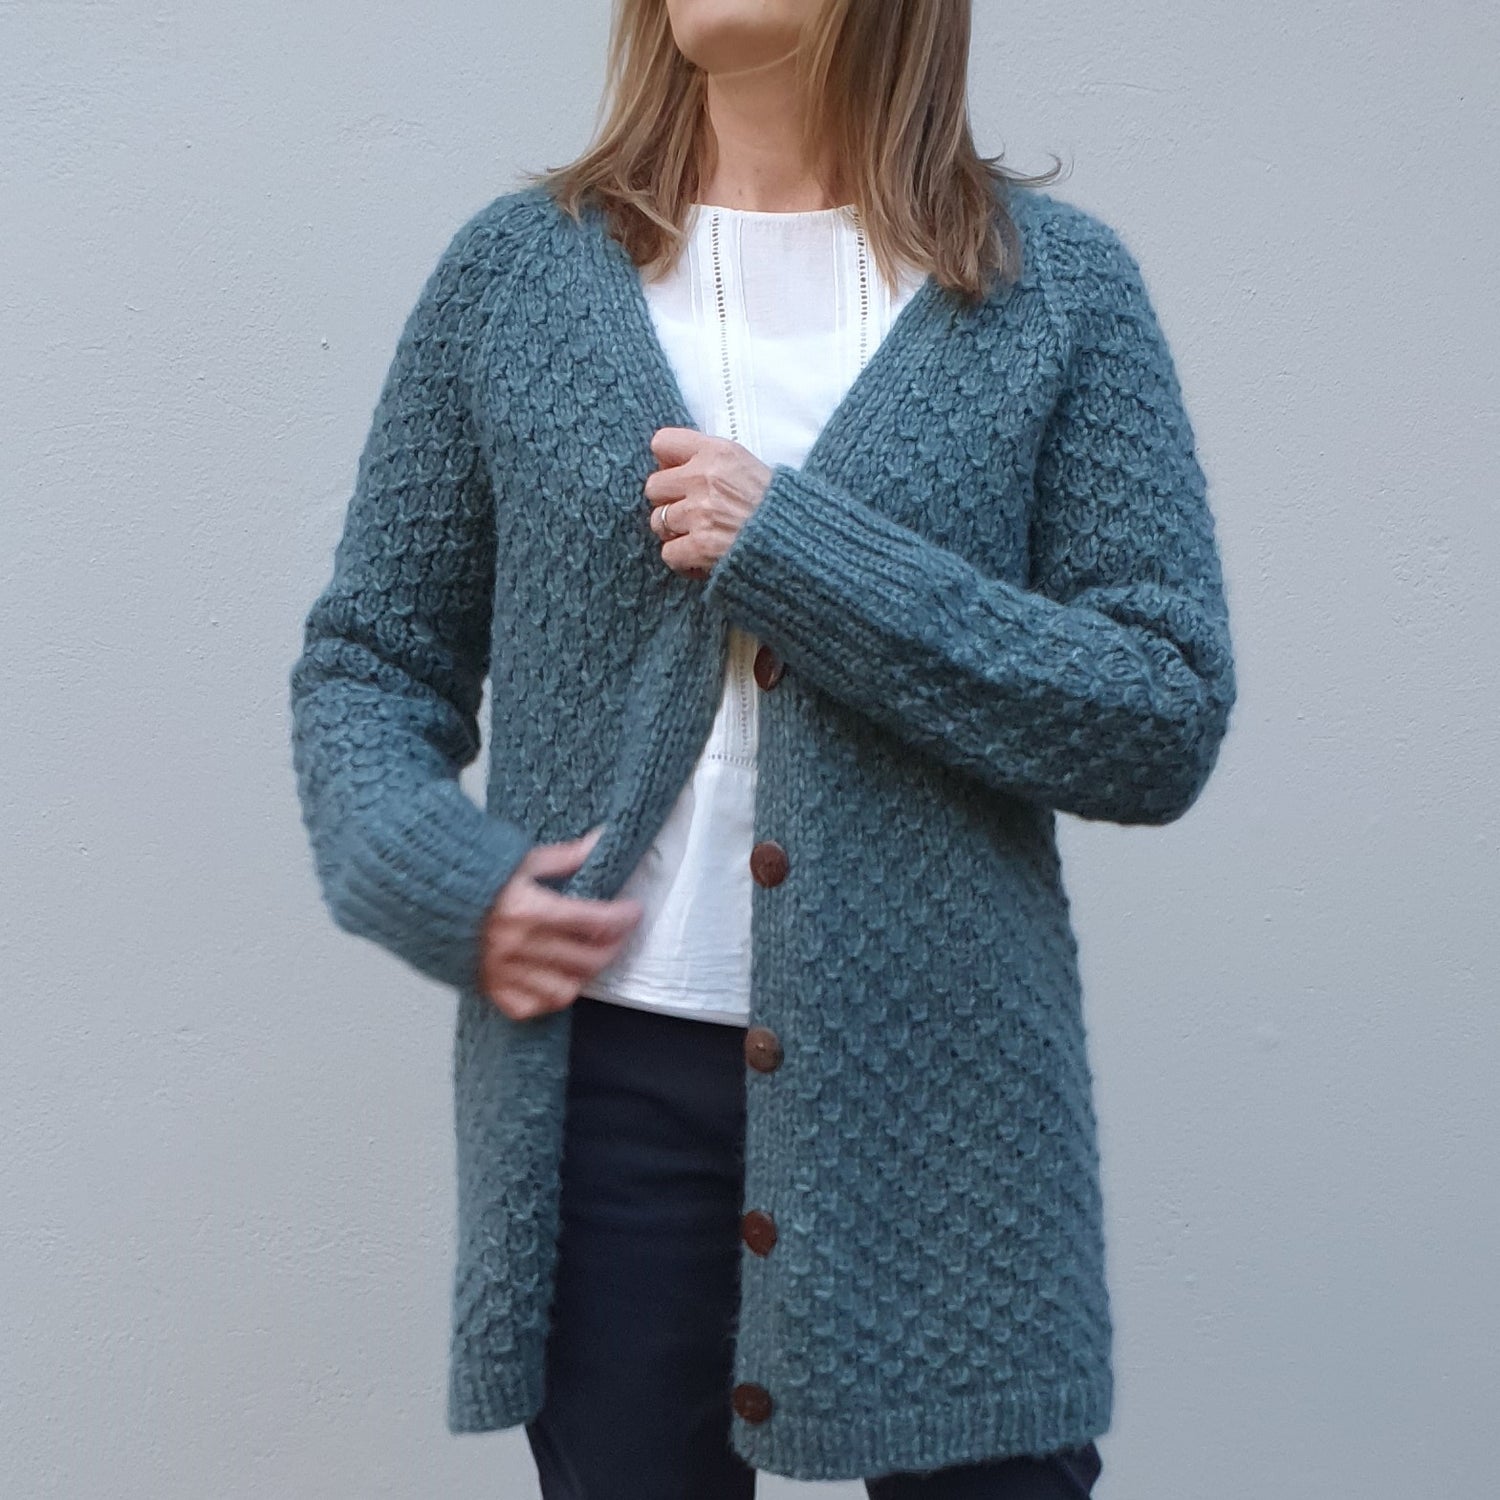 Collections – Yrja knit